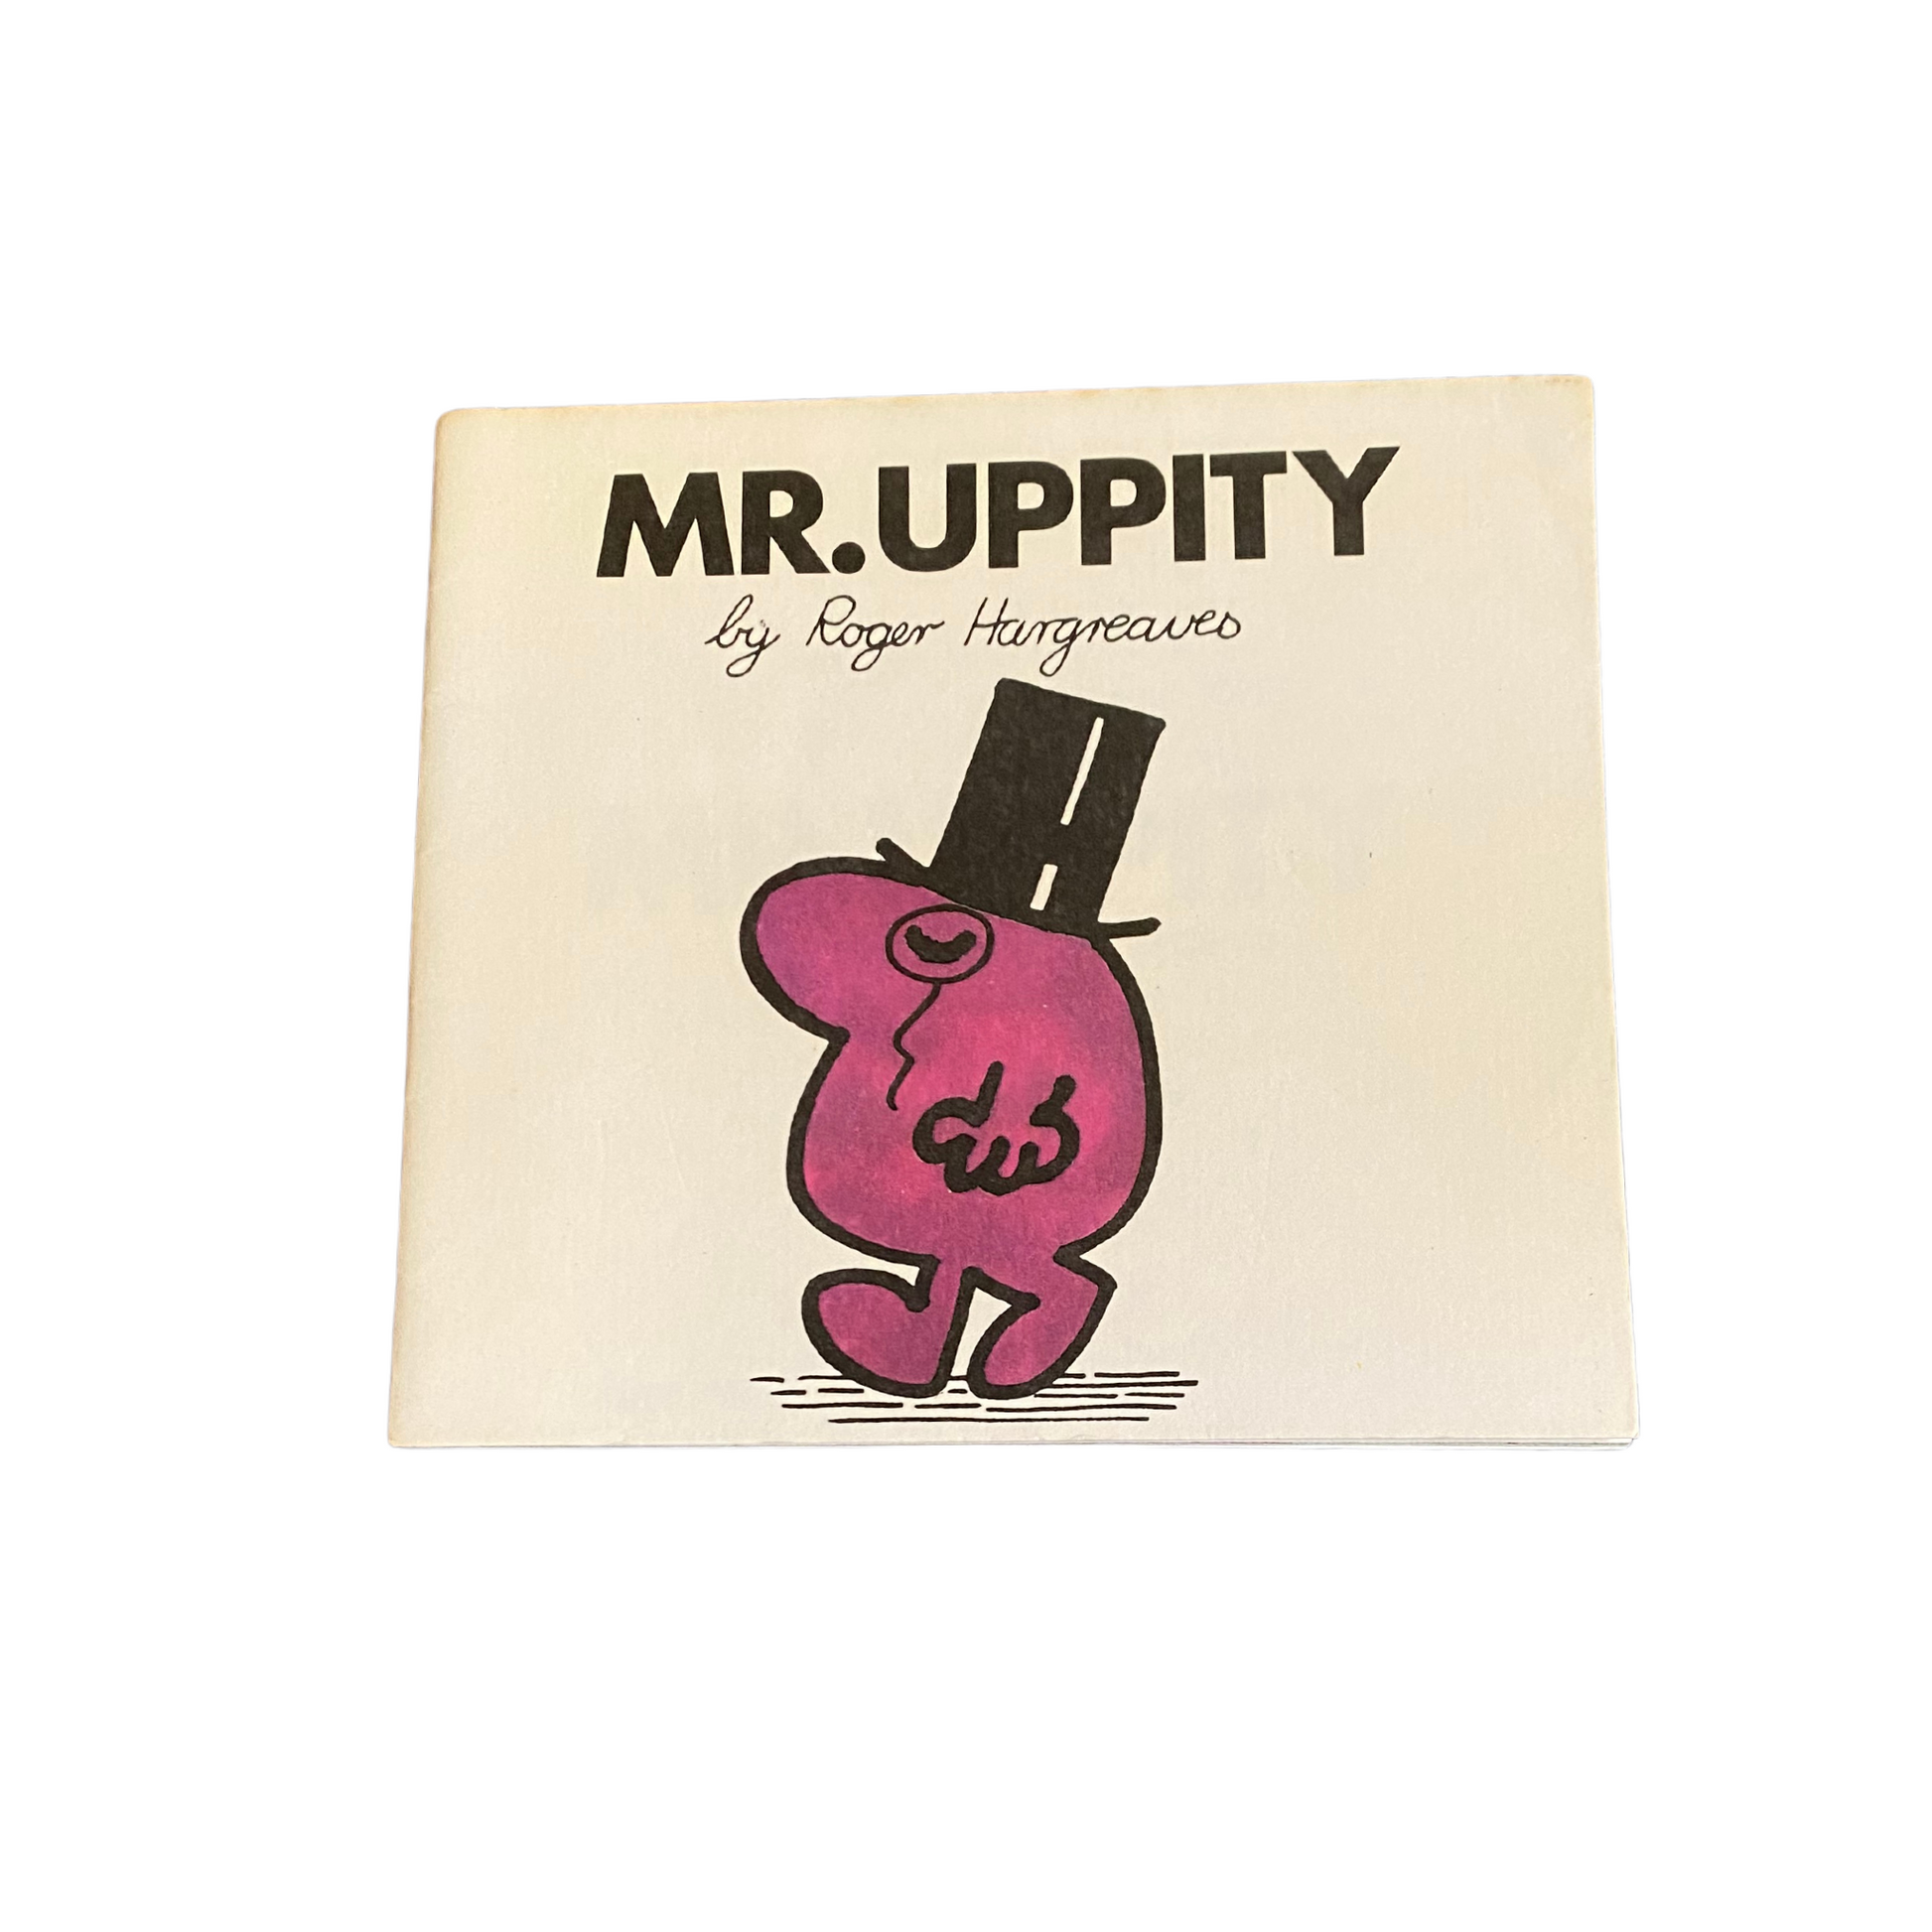 Vintage Mr Uppity book - Original 1972  Edition by Roger Hargreaves